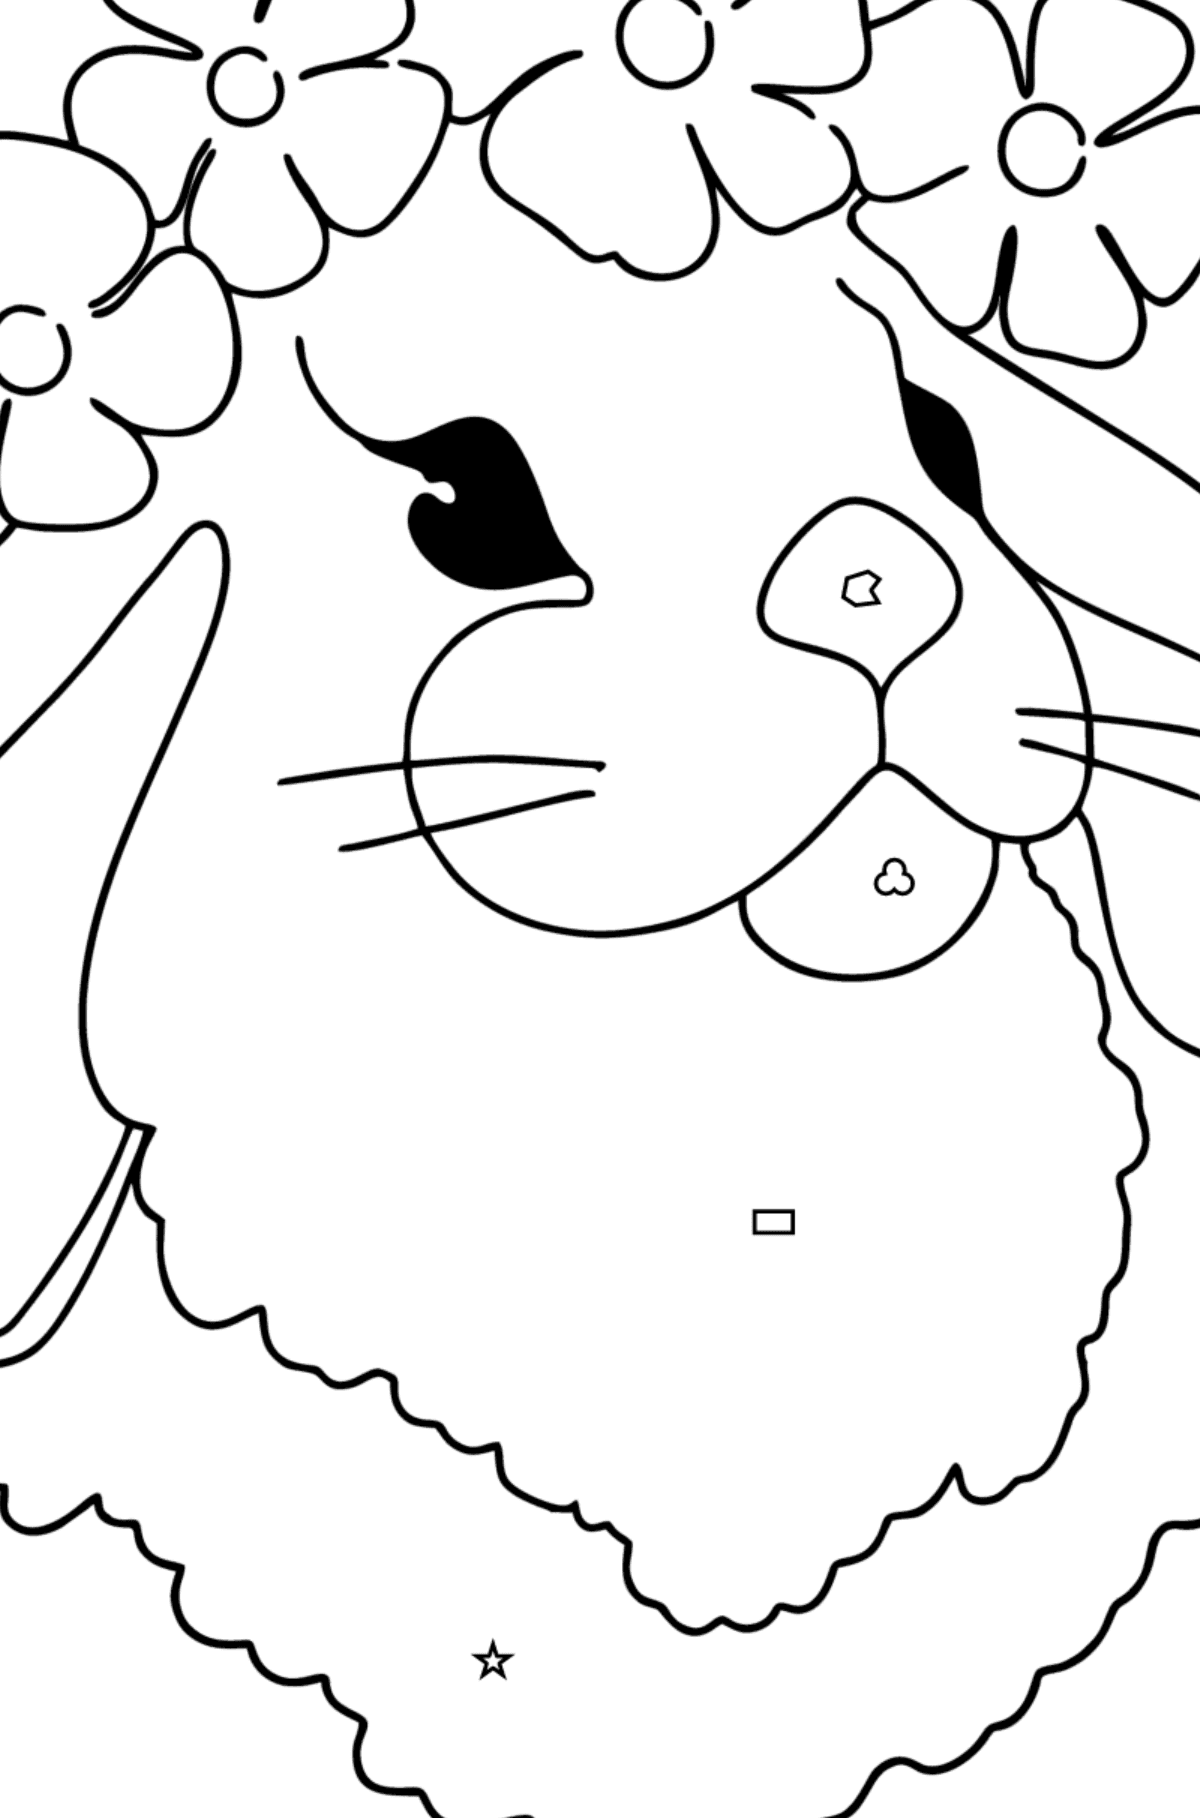 Hare Face coloring page - Coloring by Geometric Shapes for Kids